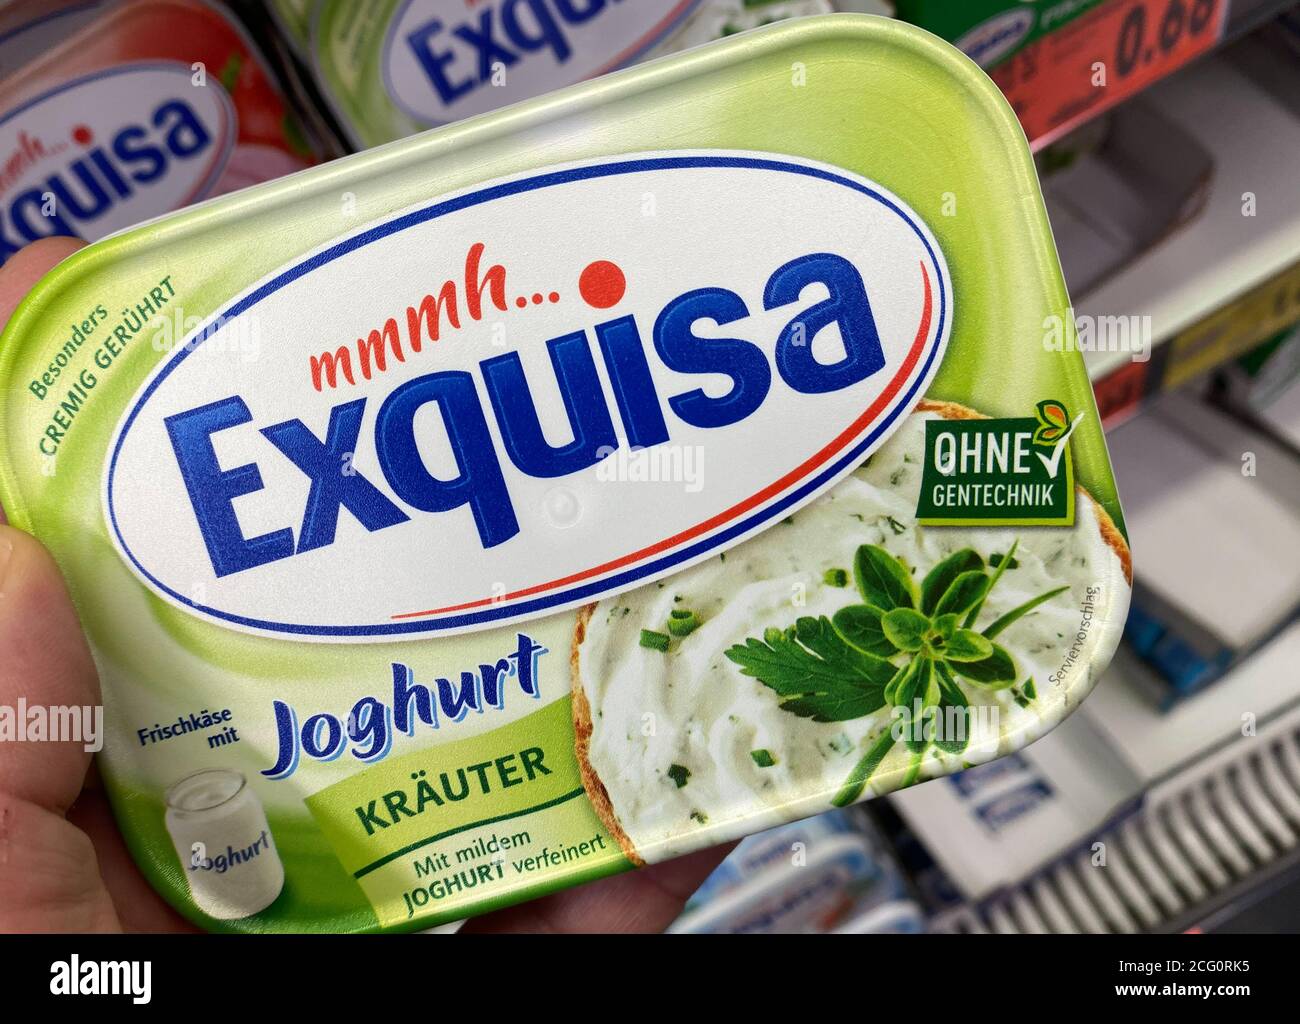 Viersen, Germany - in Stock packet spread front July supermarket Alamy hand - of 9. by Exquisa shelf german (focus 2020: in hold on packet Photo View on cheese